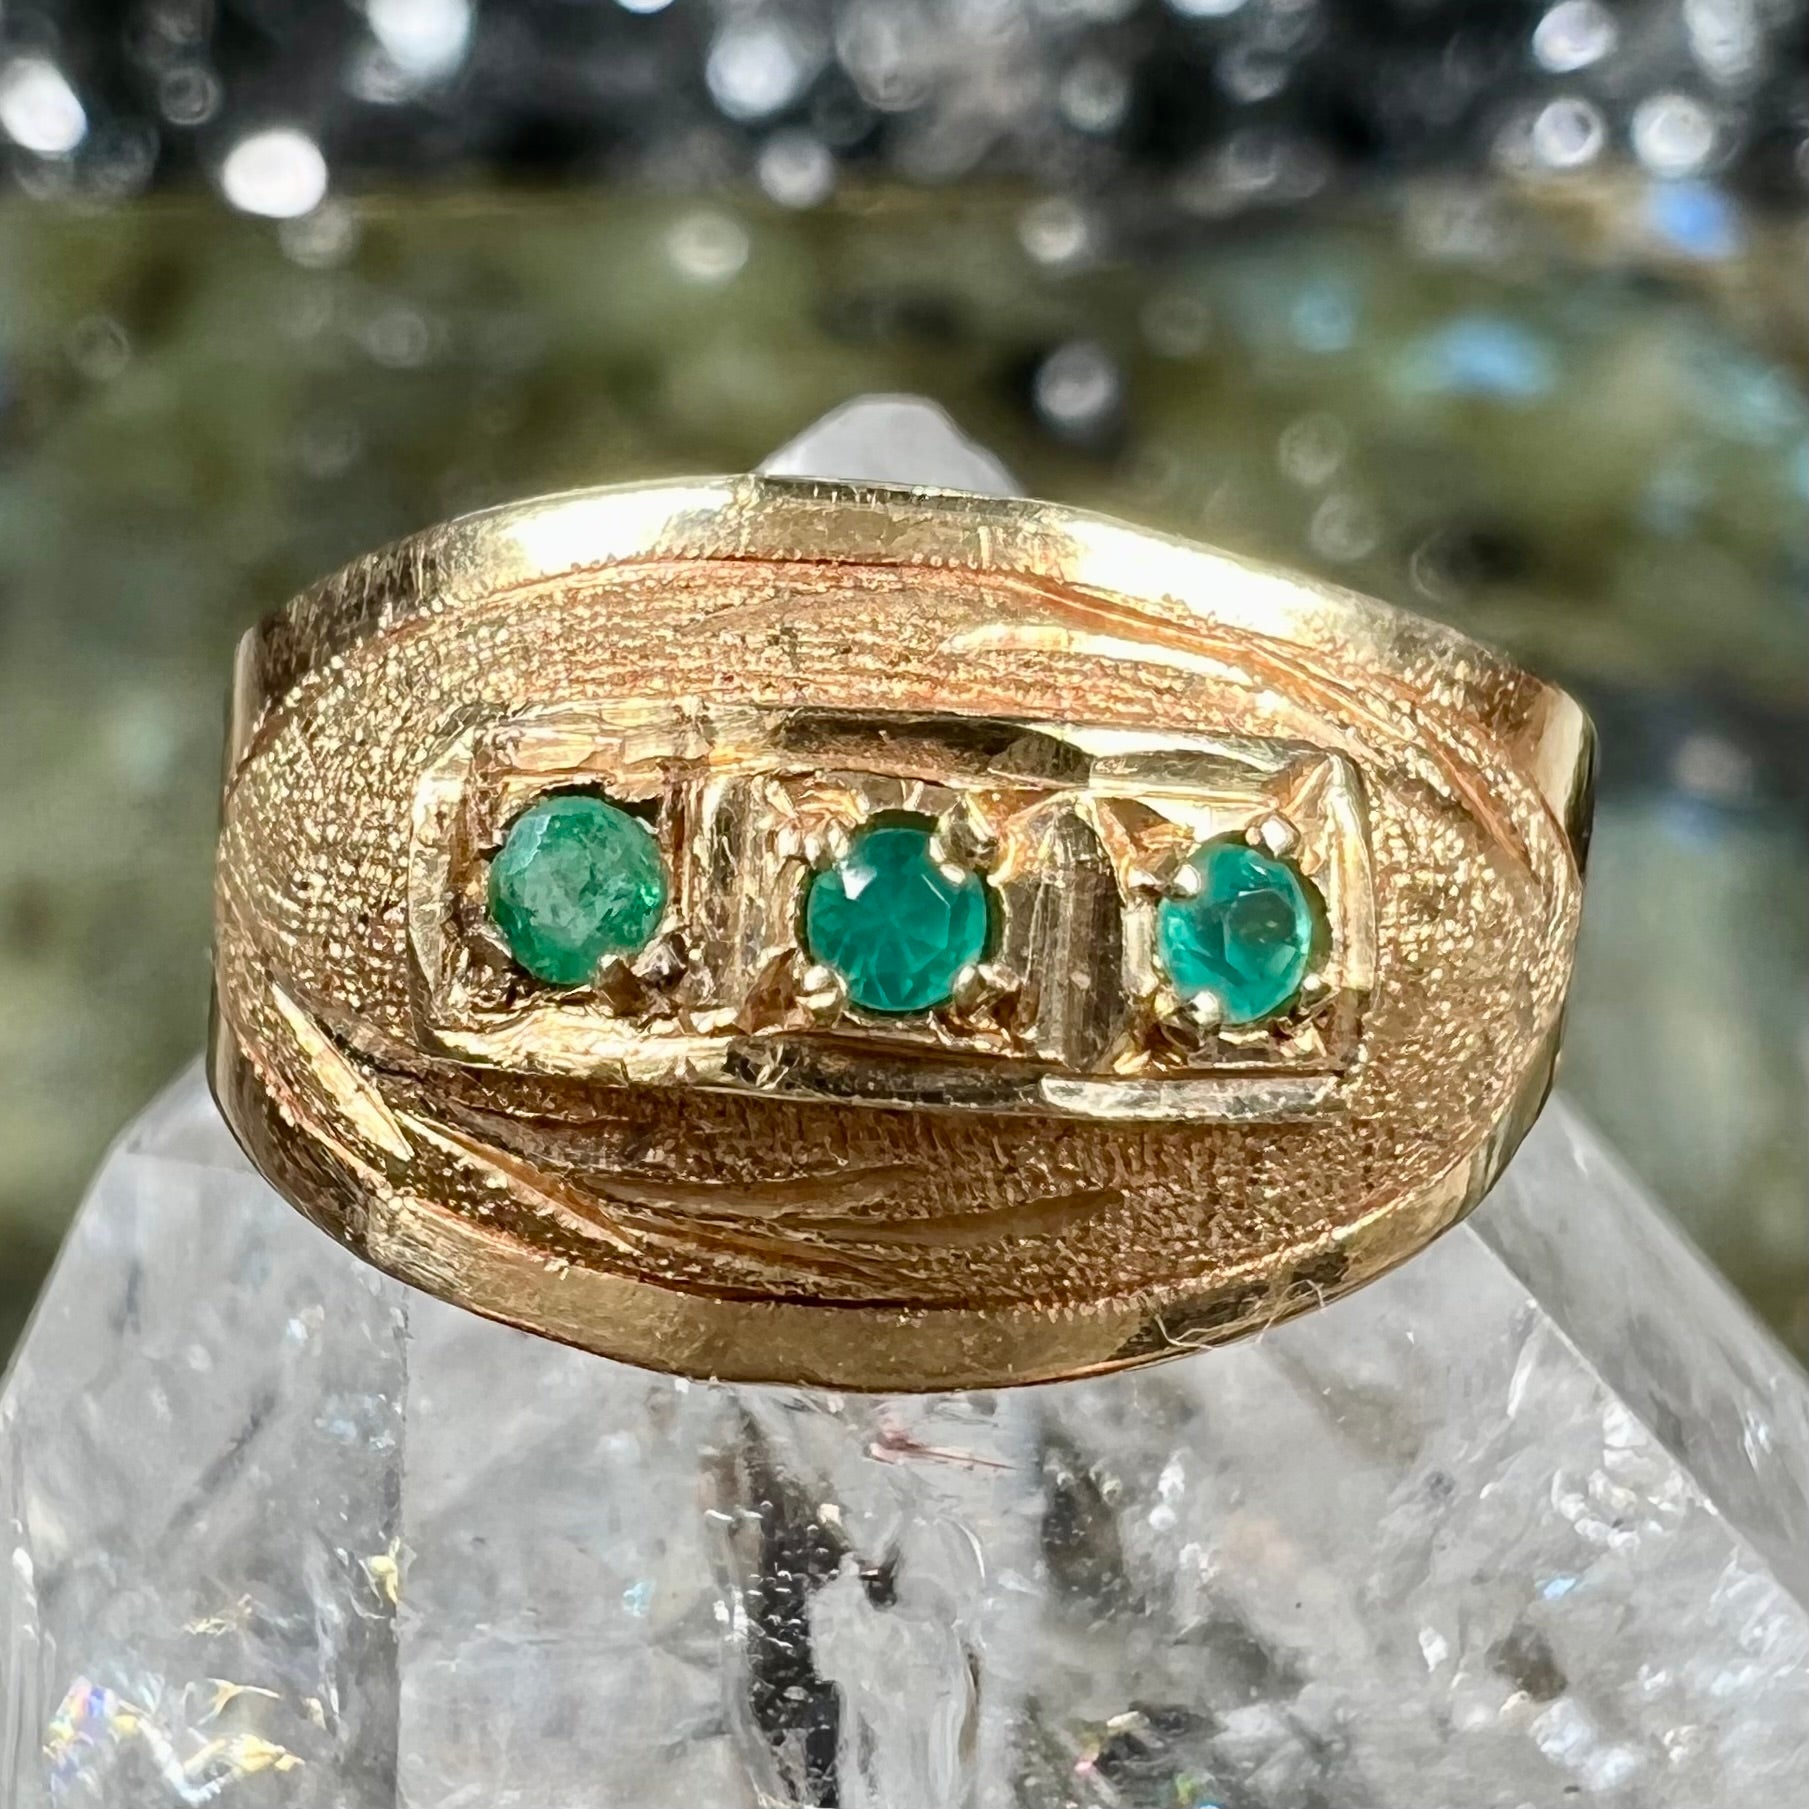 Colombian Emerald and Diamond Ring | Emerald ring design, Antique emerald  ring, Sapphire engagement ring blue